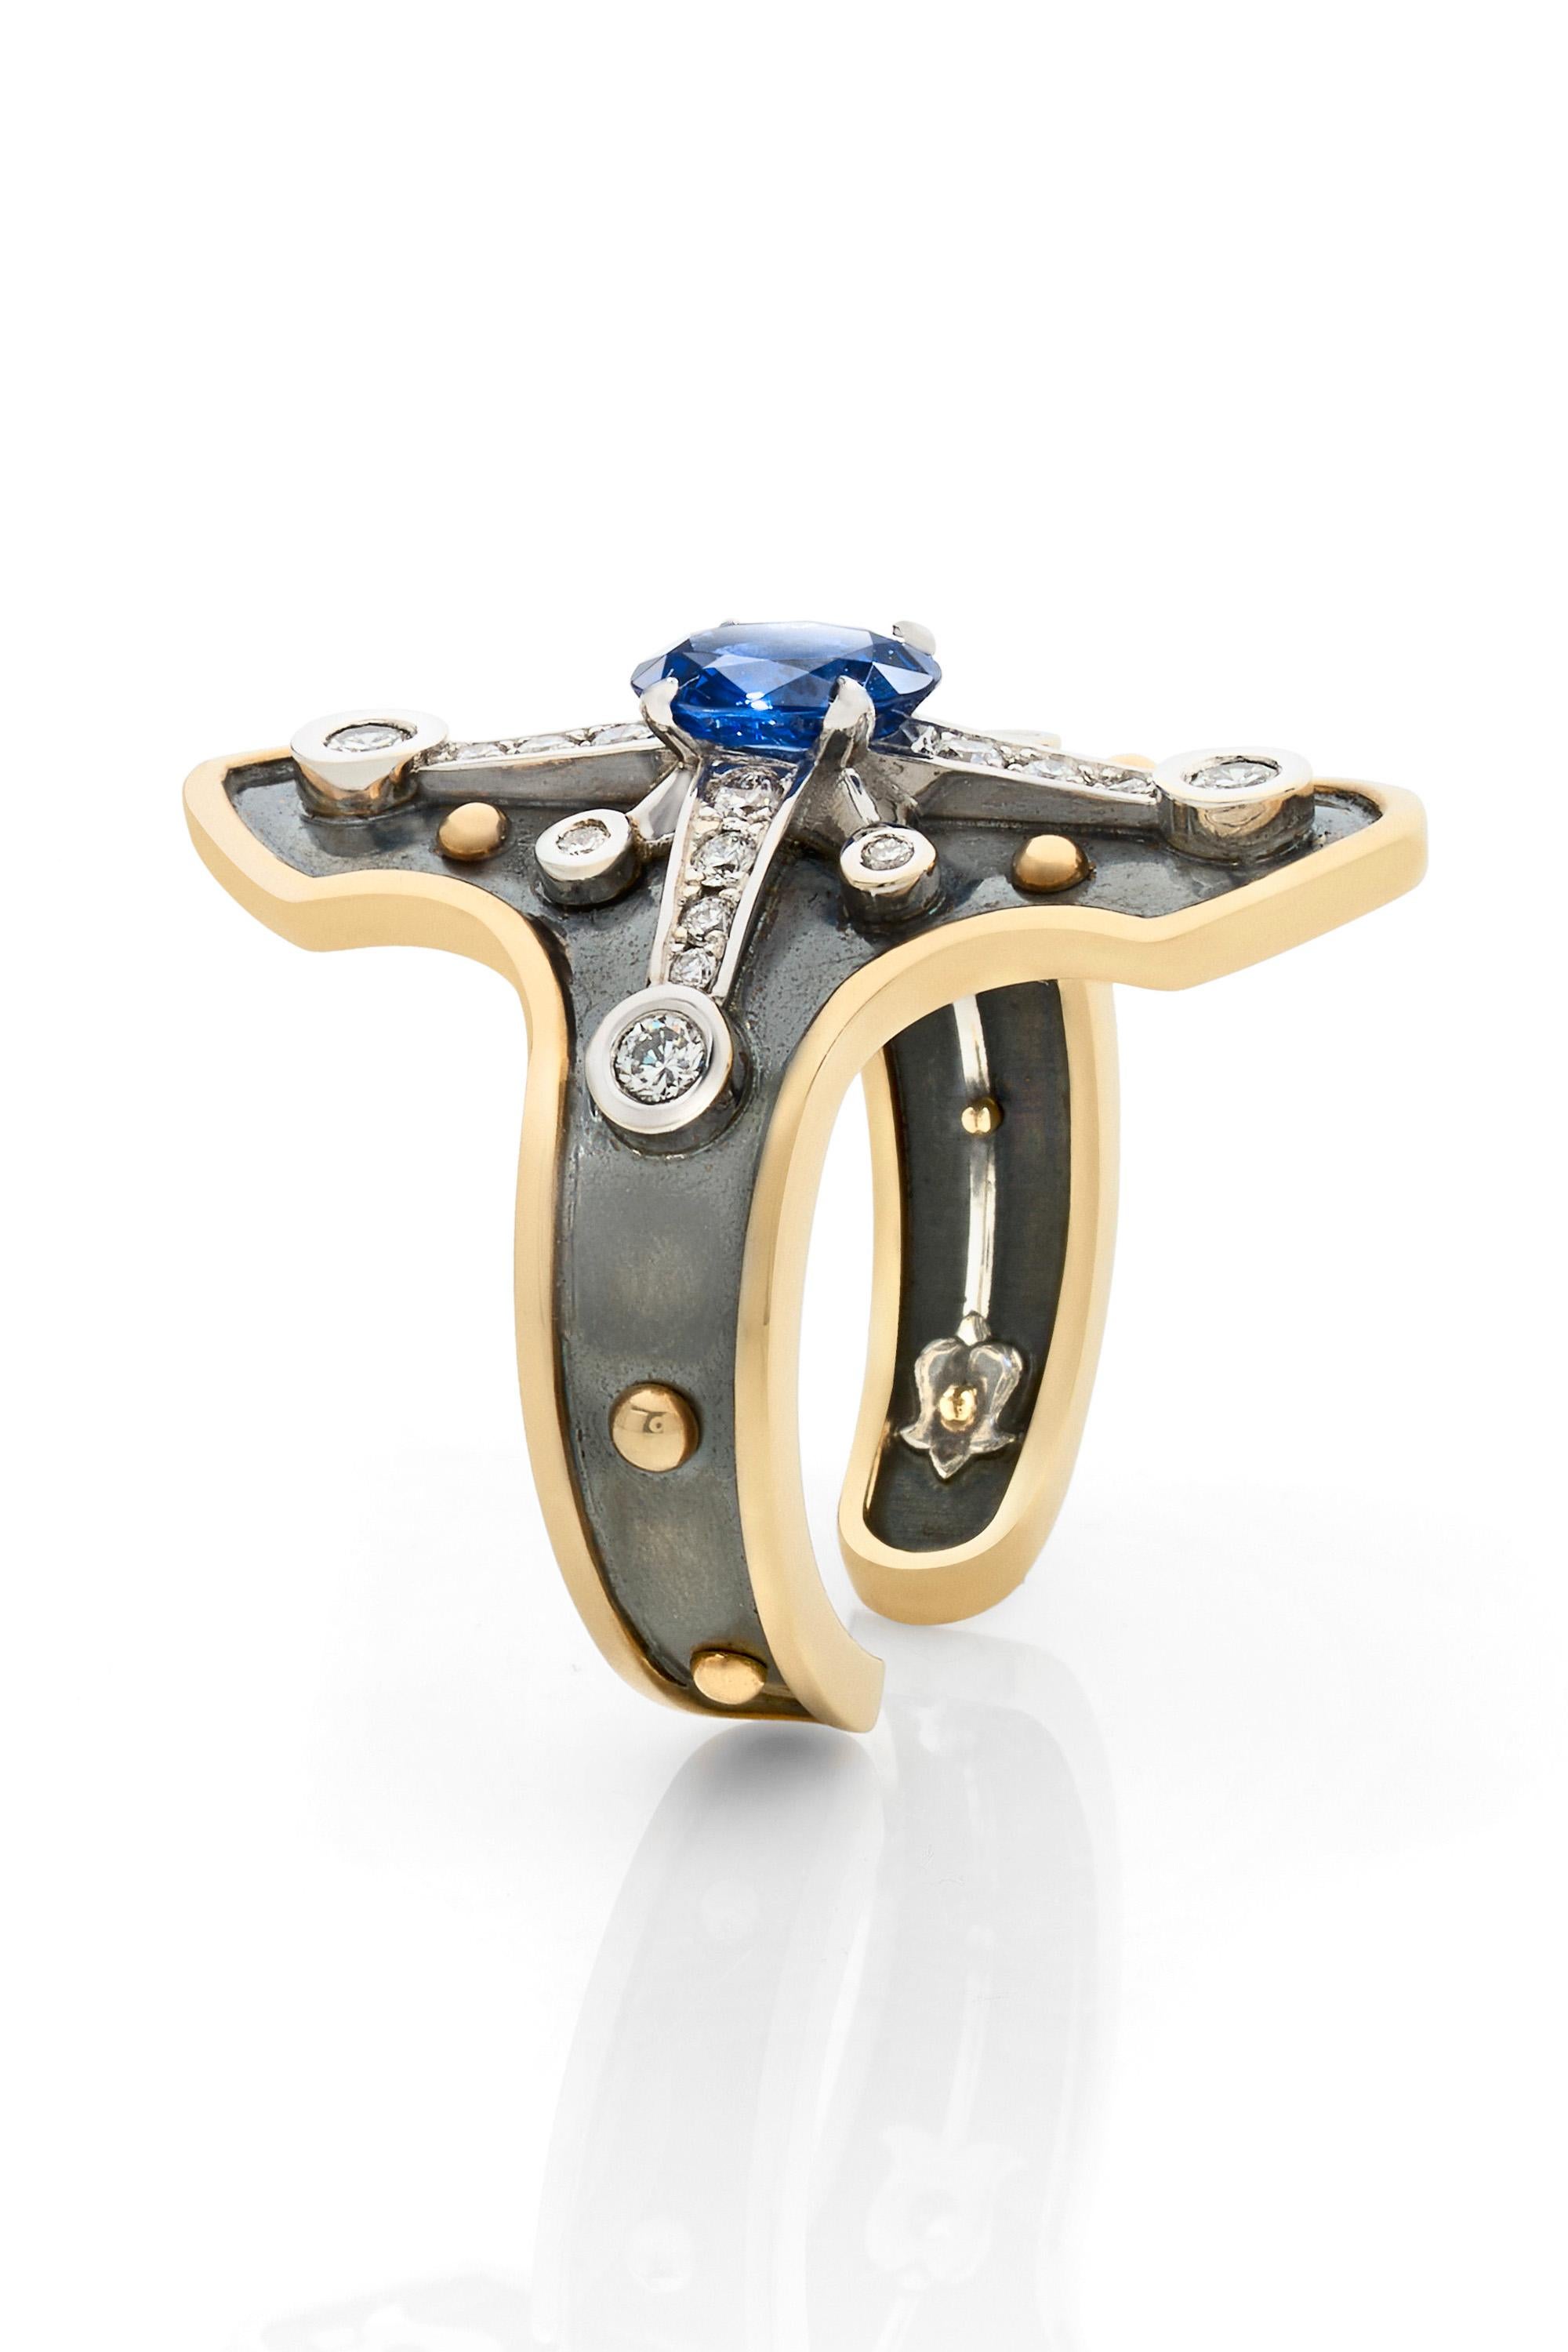 Cushion Cut Sapphire & Diamond Heaume Ring  in 18k Gold by Elie Top For Sale